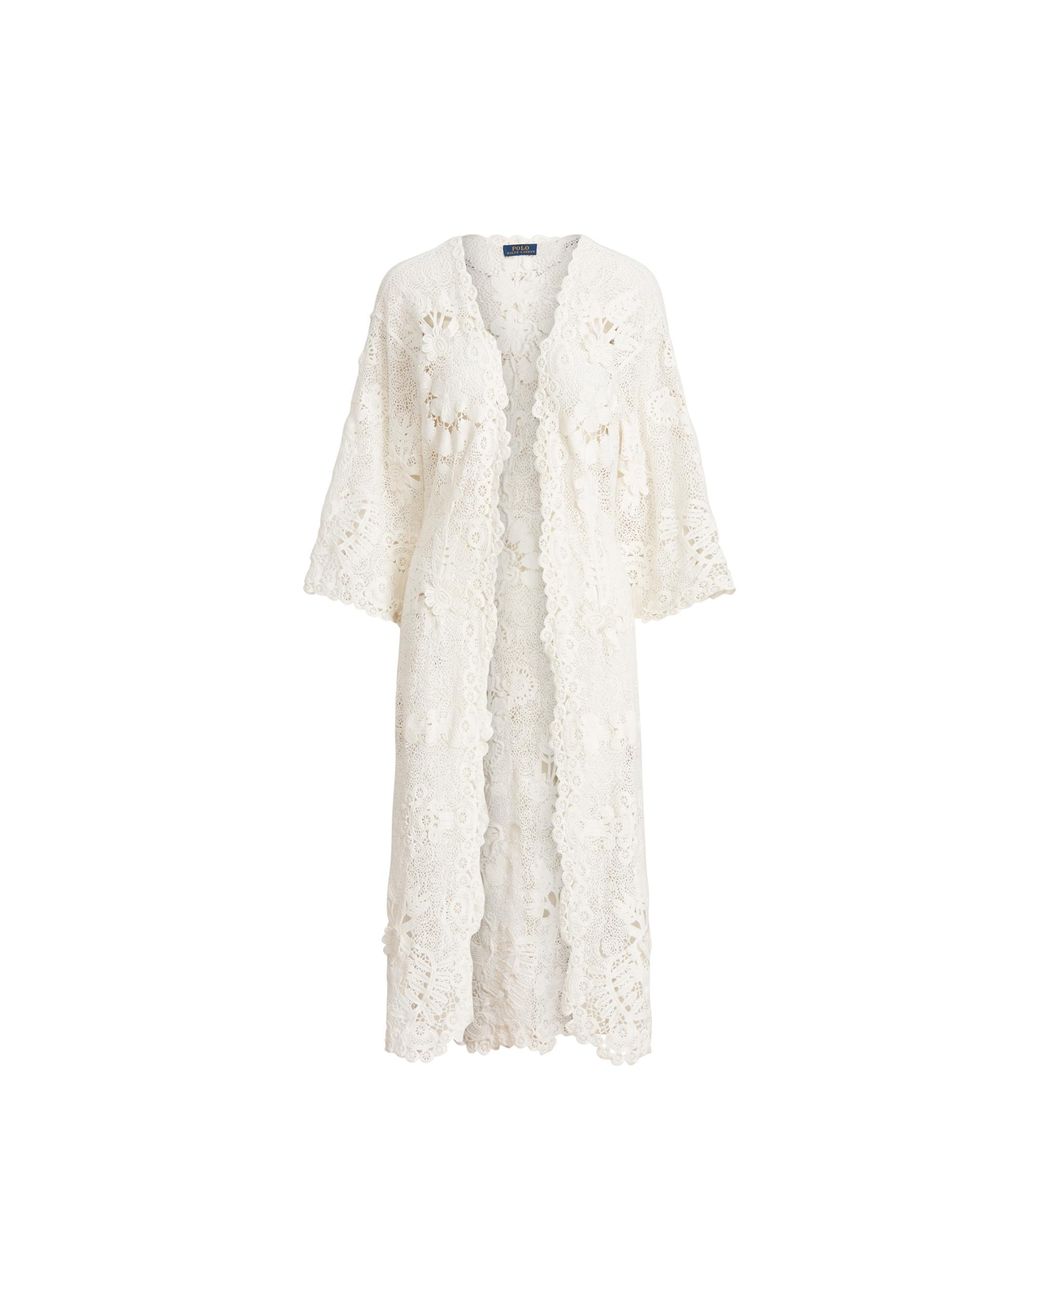 Ralph Lauren Cotton Lace Duster in White - Lyst